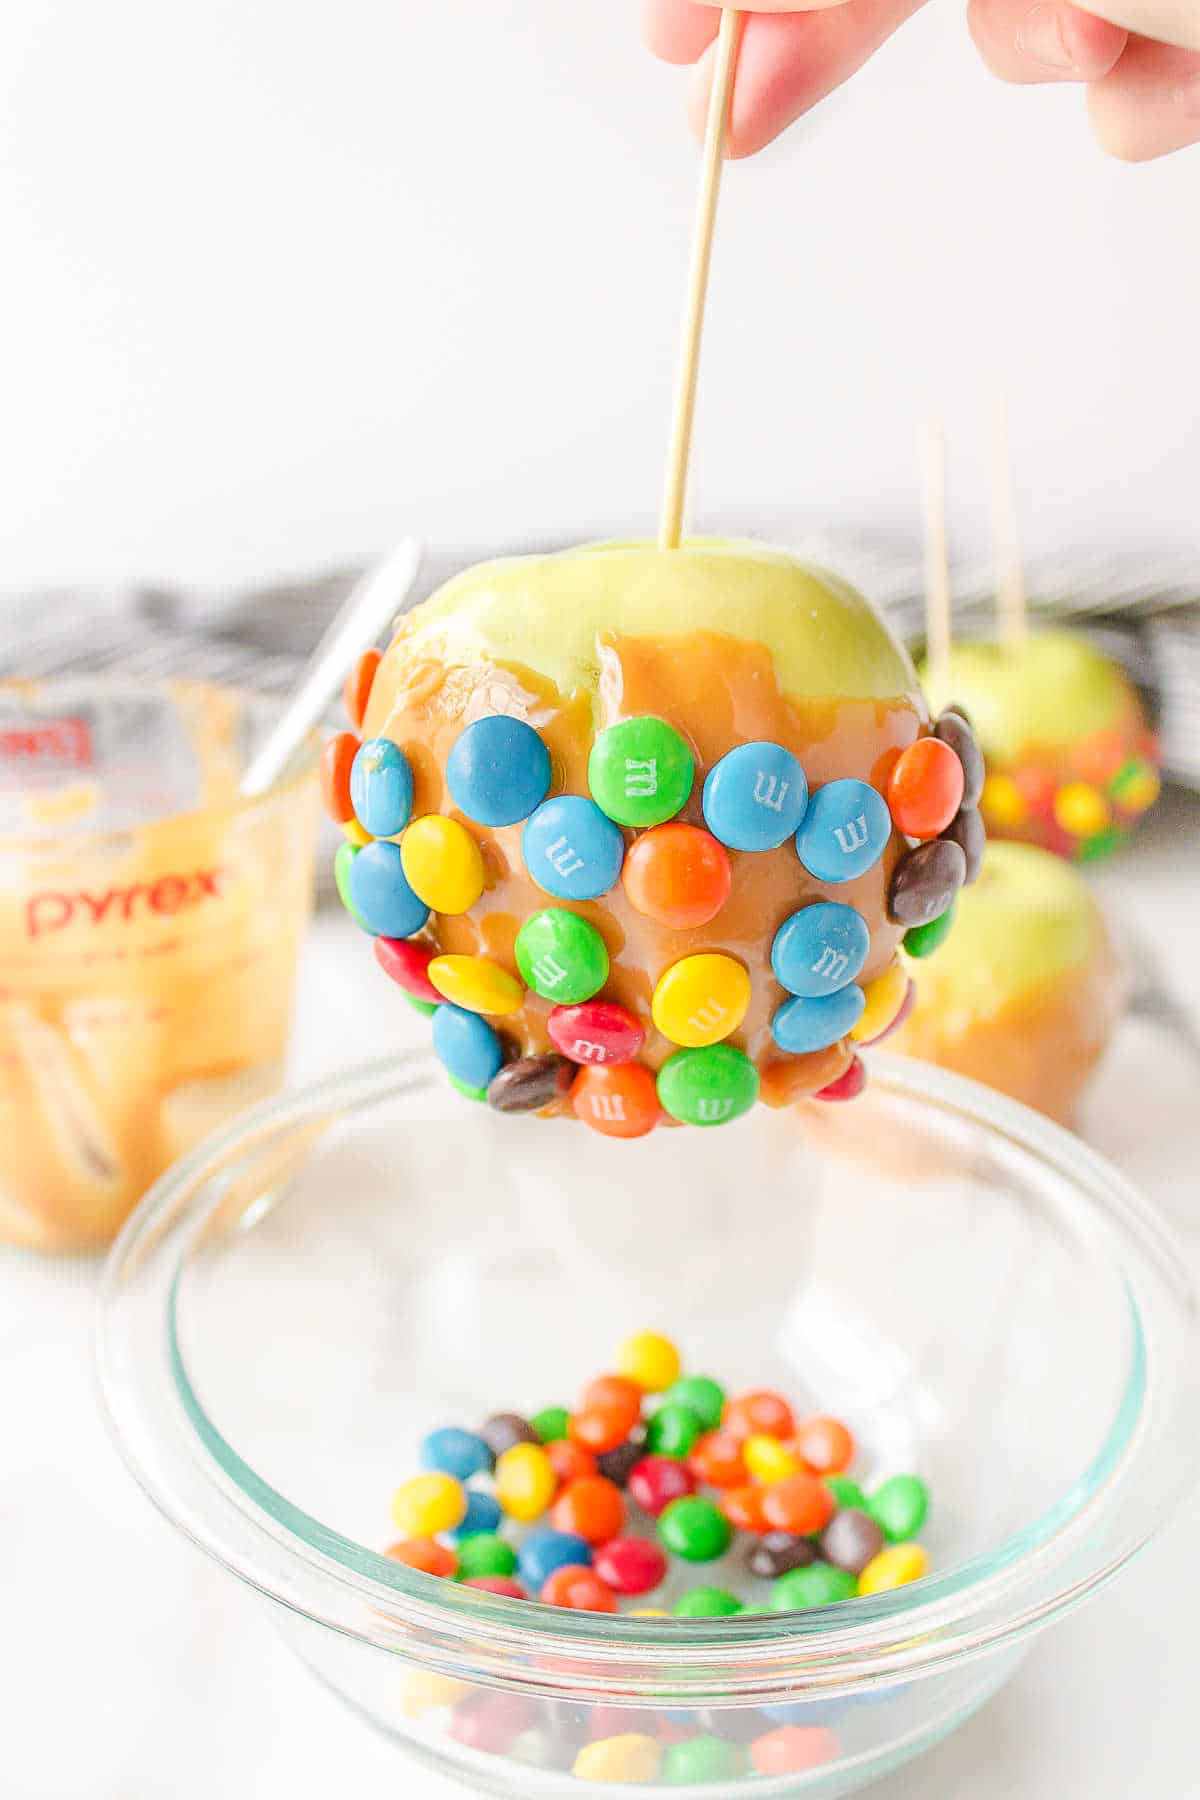 A caramel apple on a stick getting coated in M&Ms. 